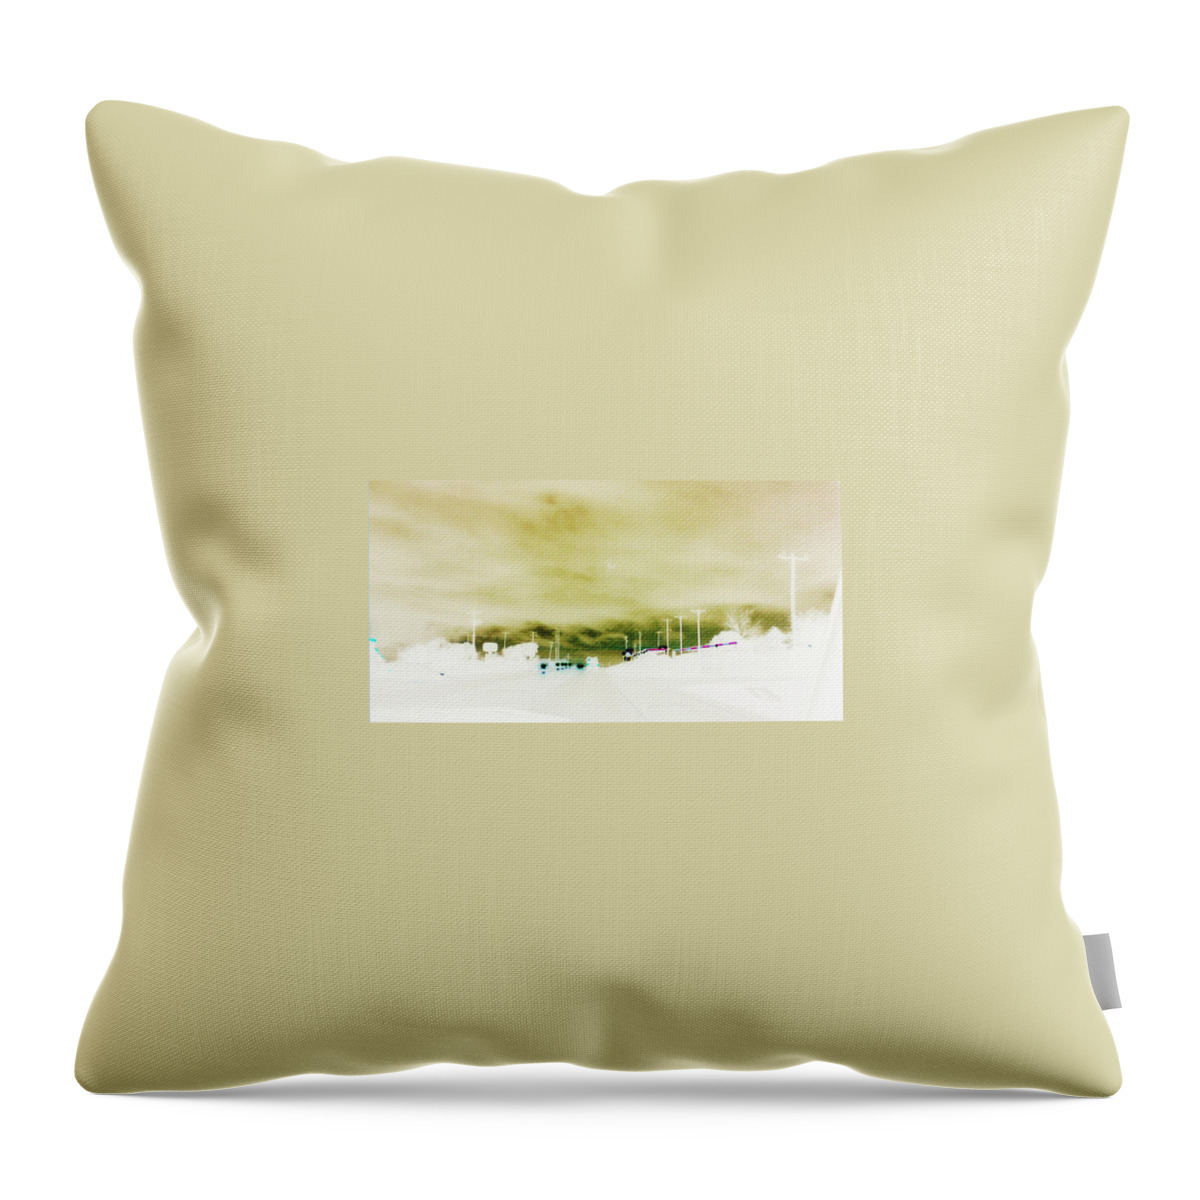 Texas Throw Pillow featuring the photograph City Limits by Max Mullins